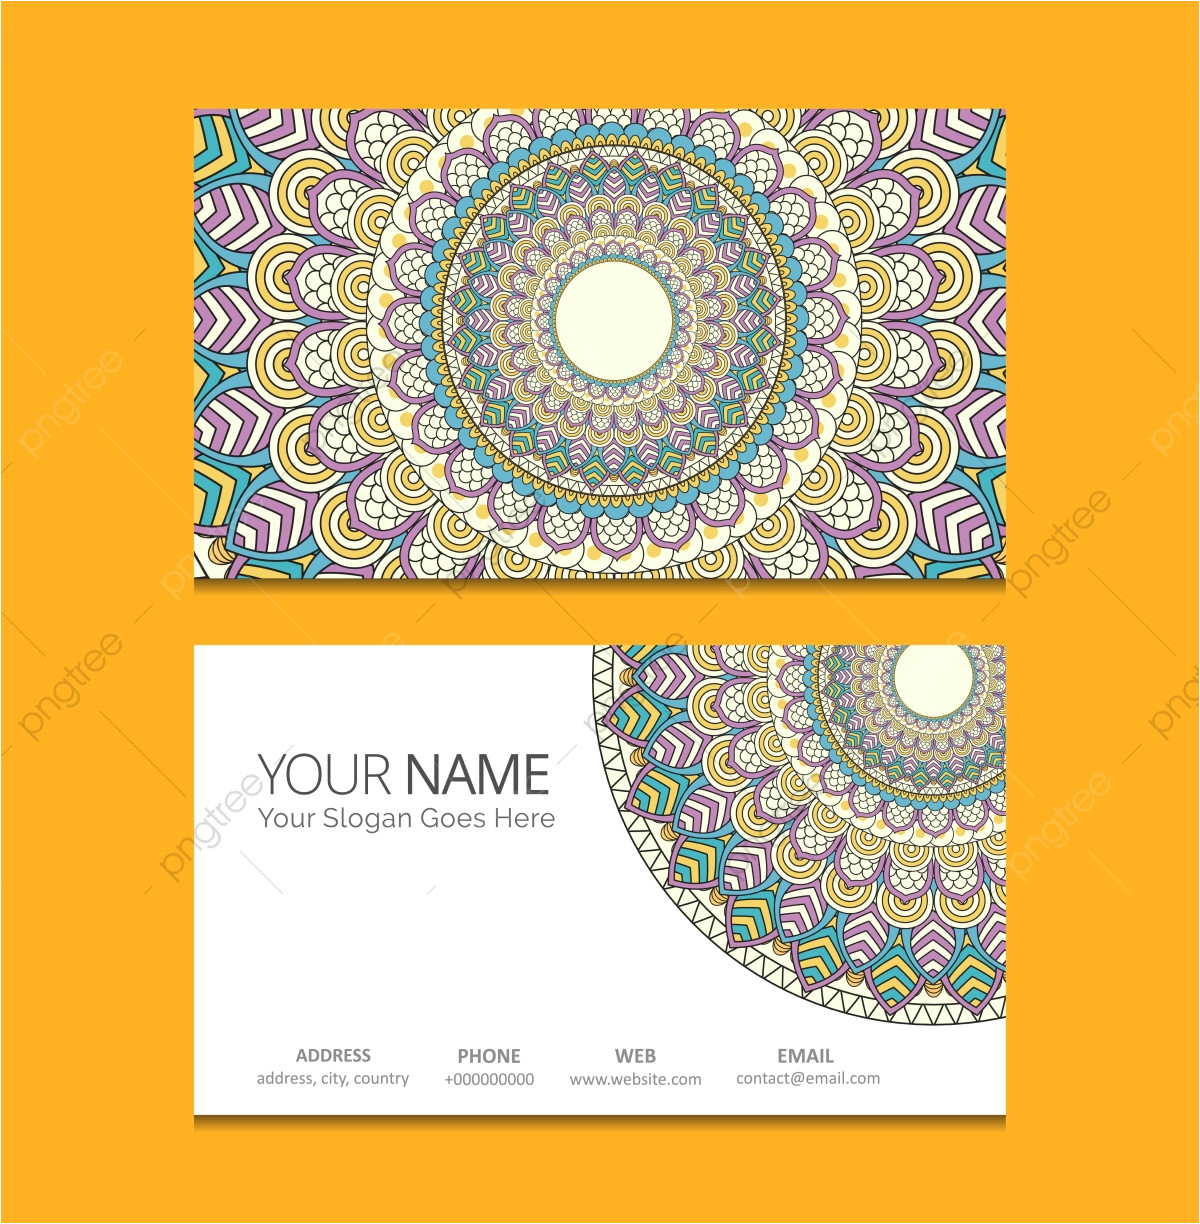 Blank Visiting Card Background Design Png Hd Business Card Design Png Images Vector and Psd Files